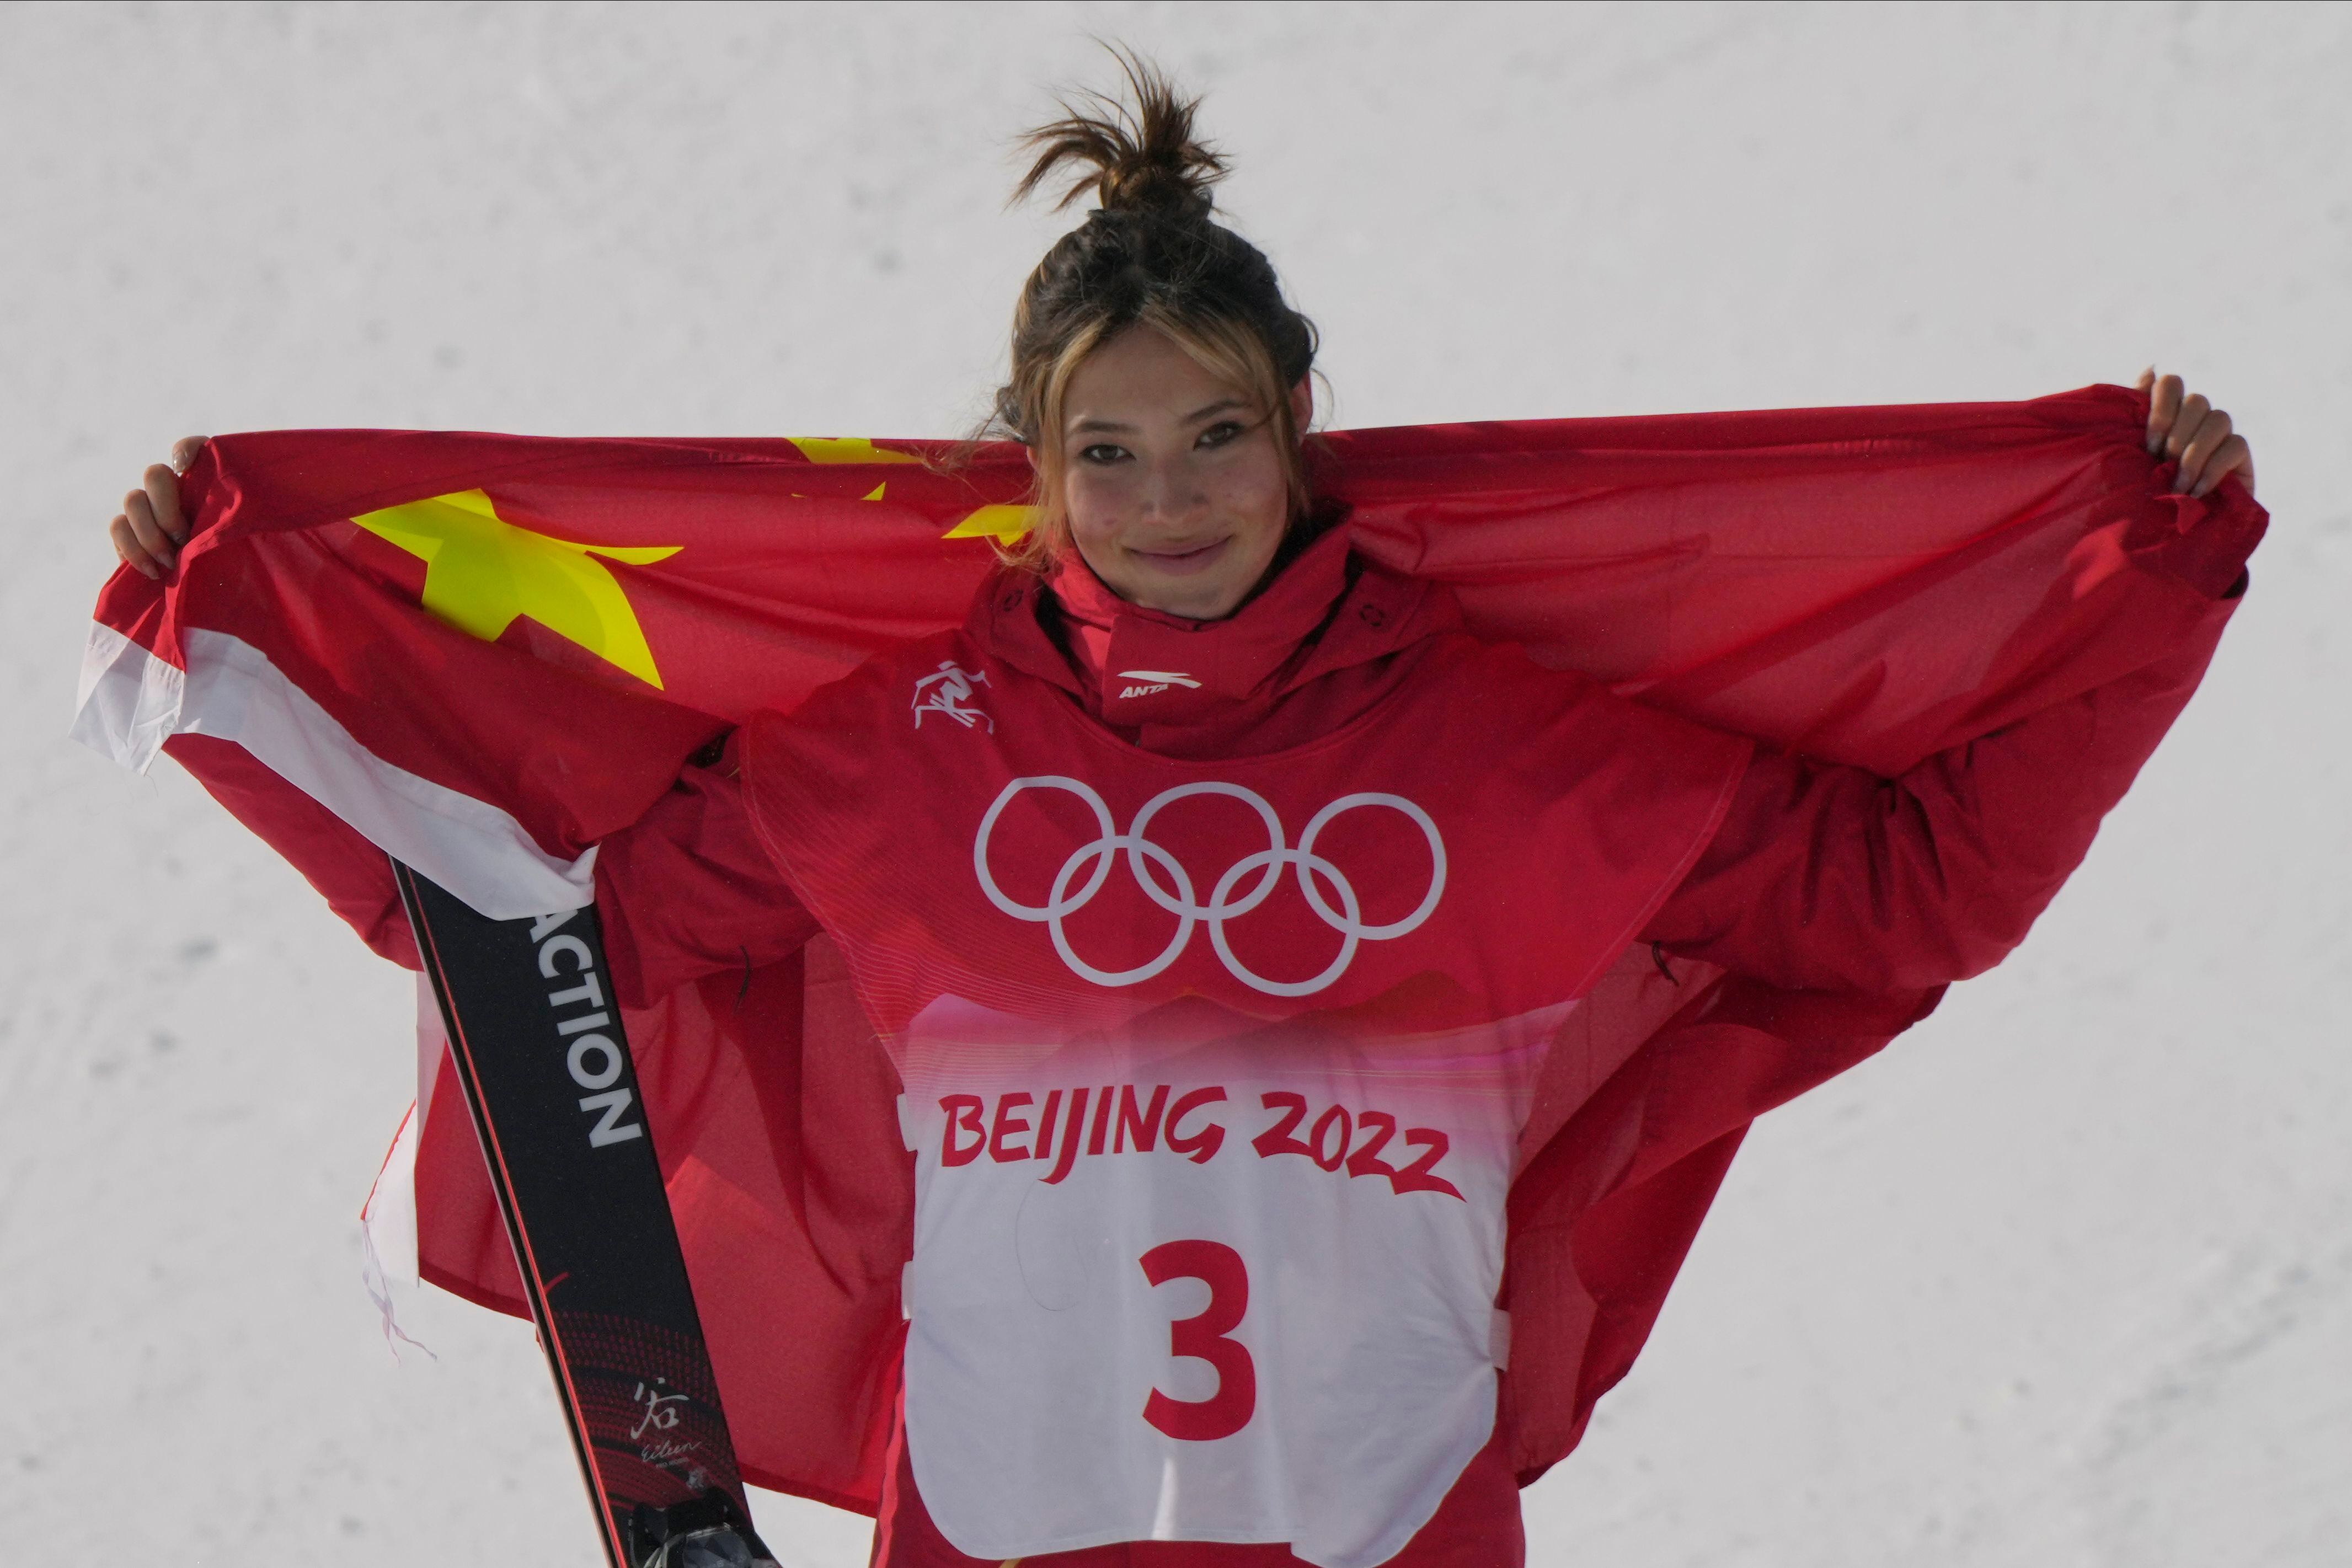 Eileen Gu wins gold in halfpipe, her third medal of the Beijing Olympics -  The Washington Post